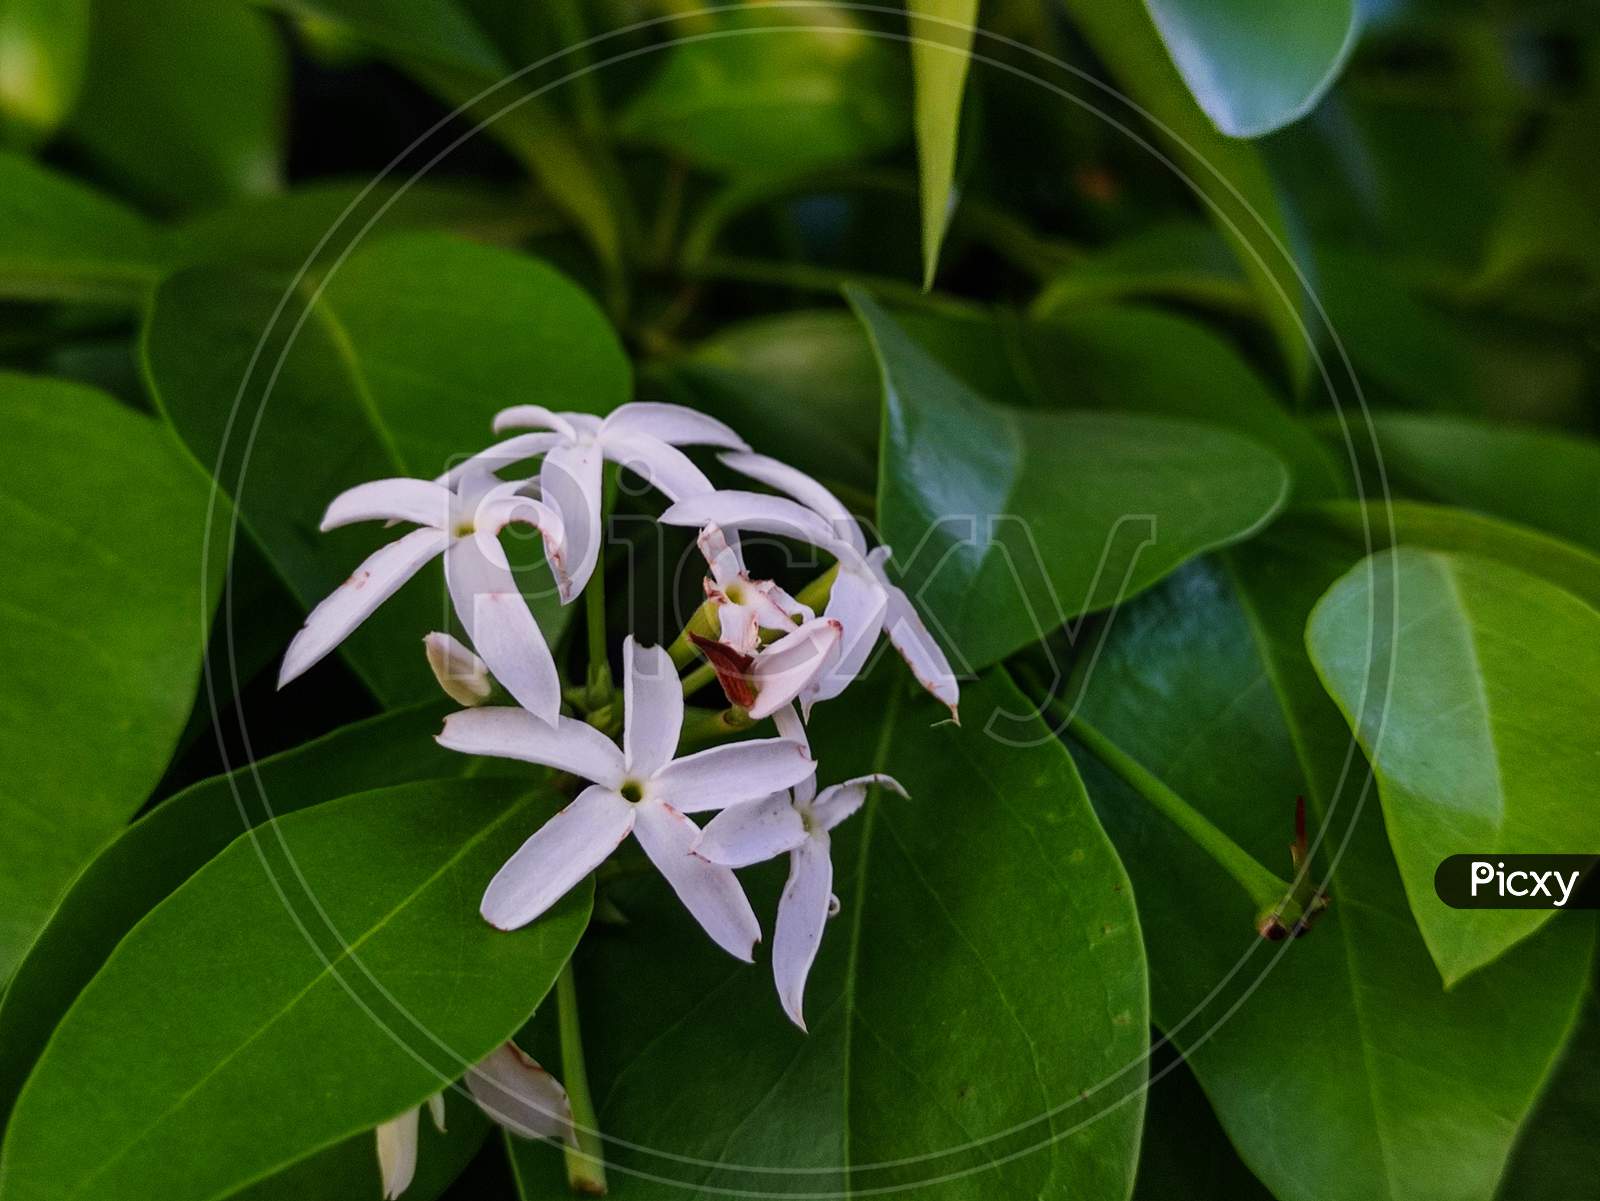 Bunch of white flower with green leafs